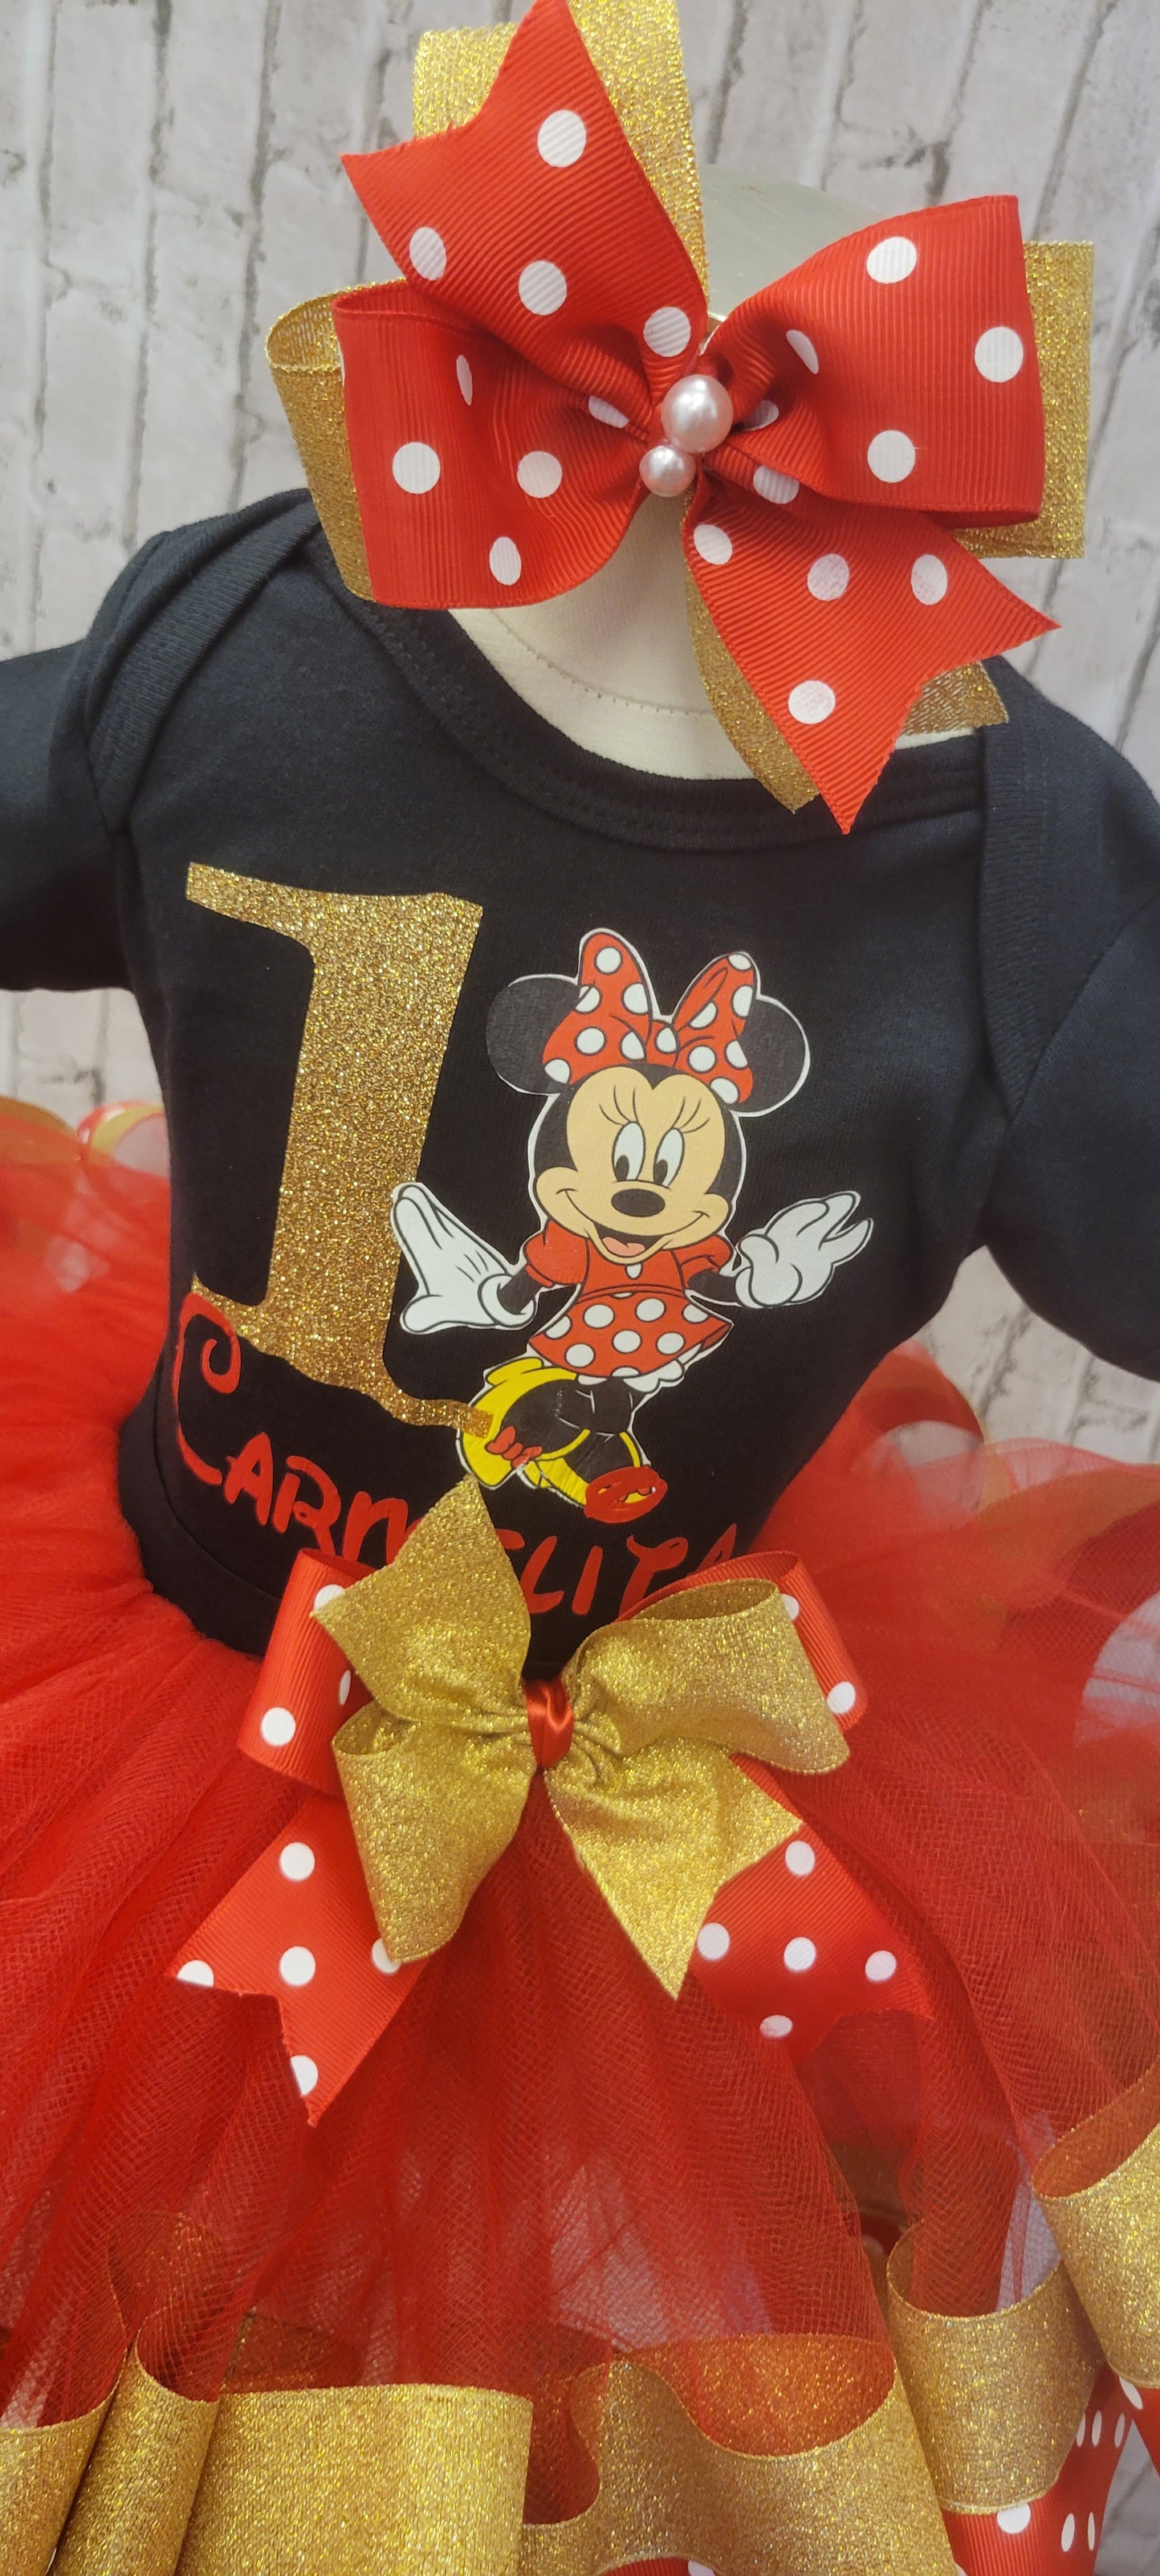 Red Minnie Personalized Tutu Outfit